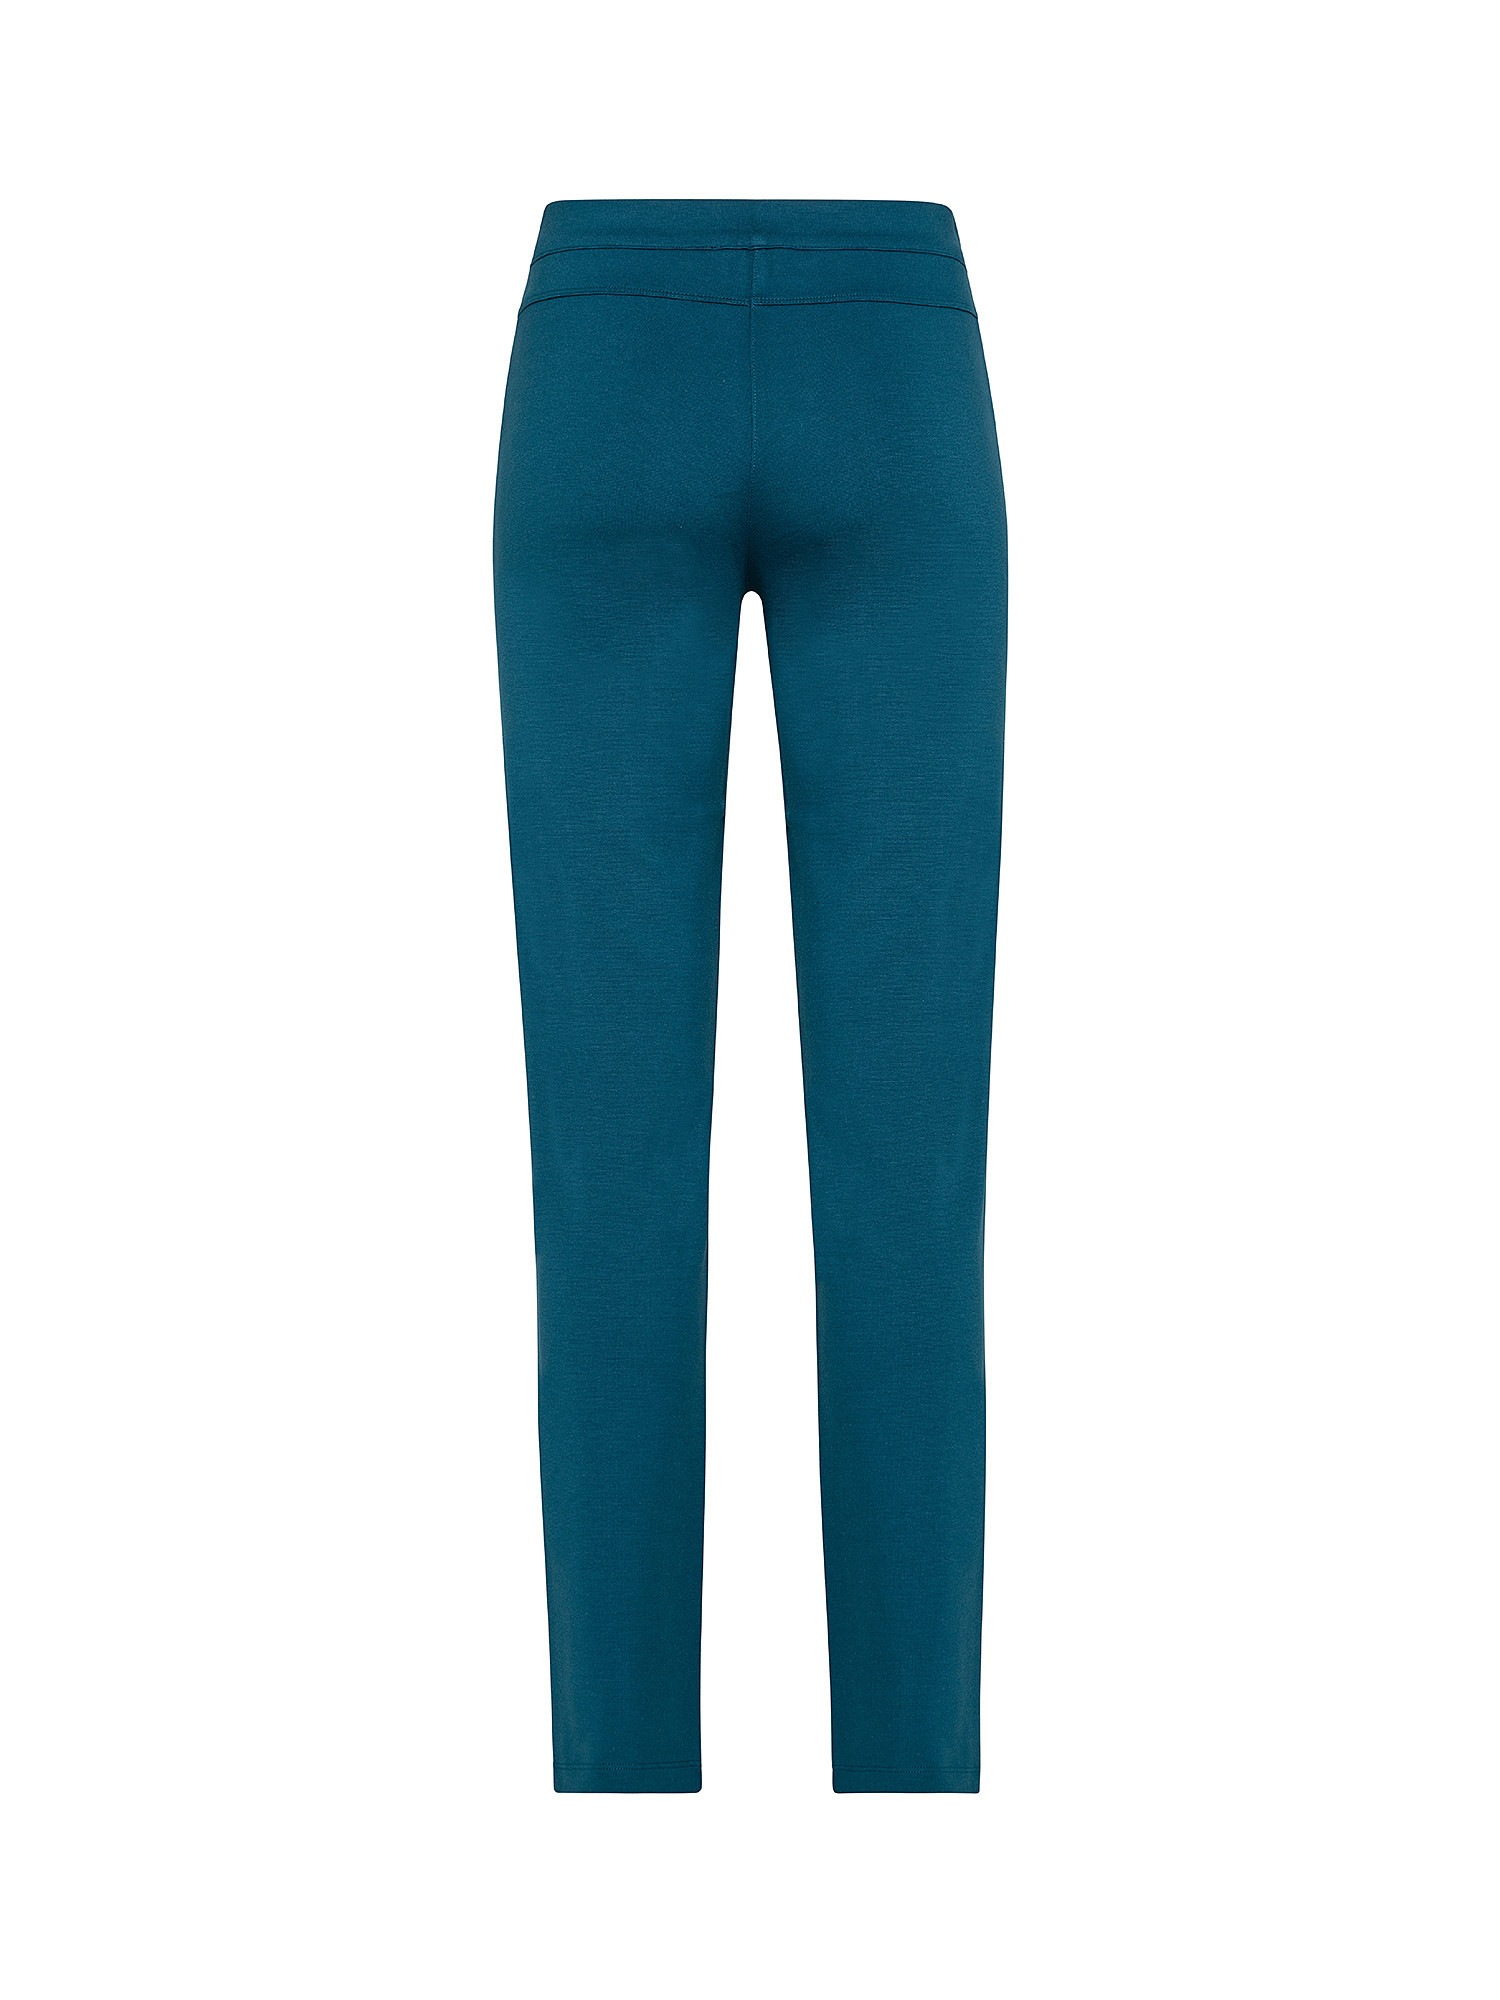 Trousers with pockets, Green teal, large image number 1